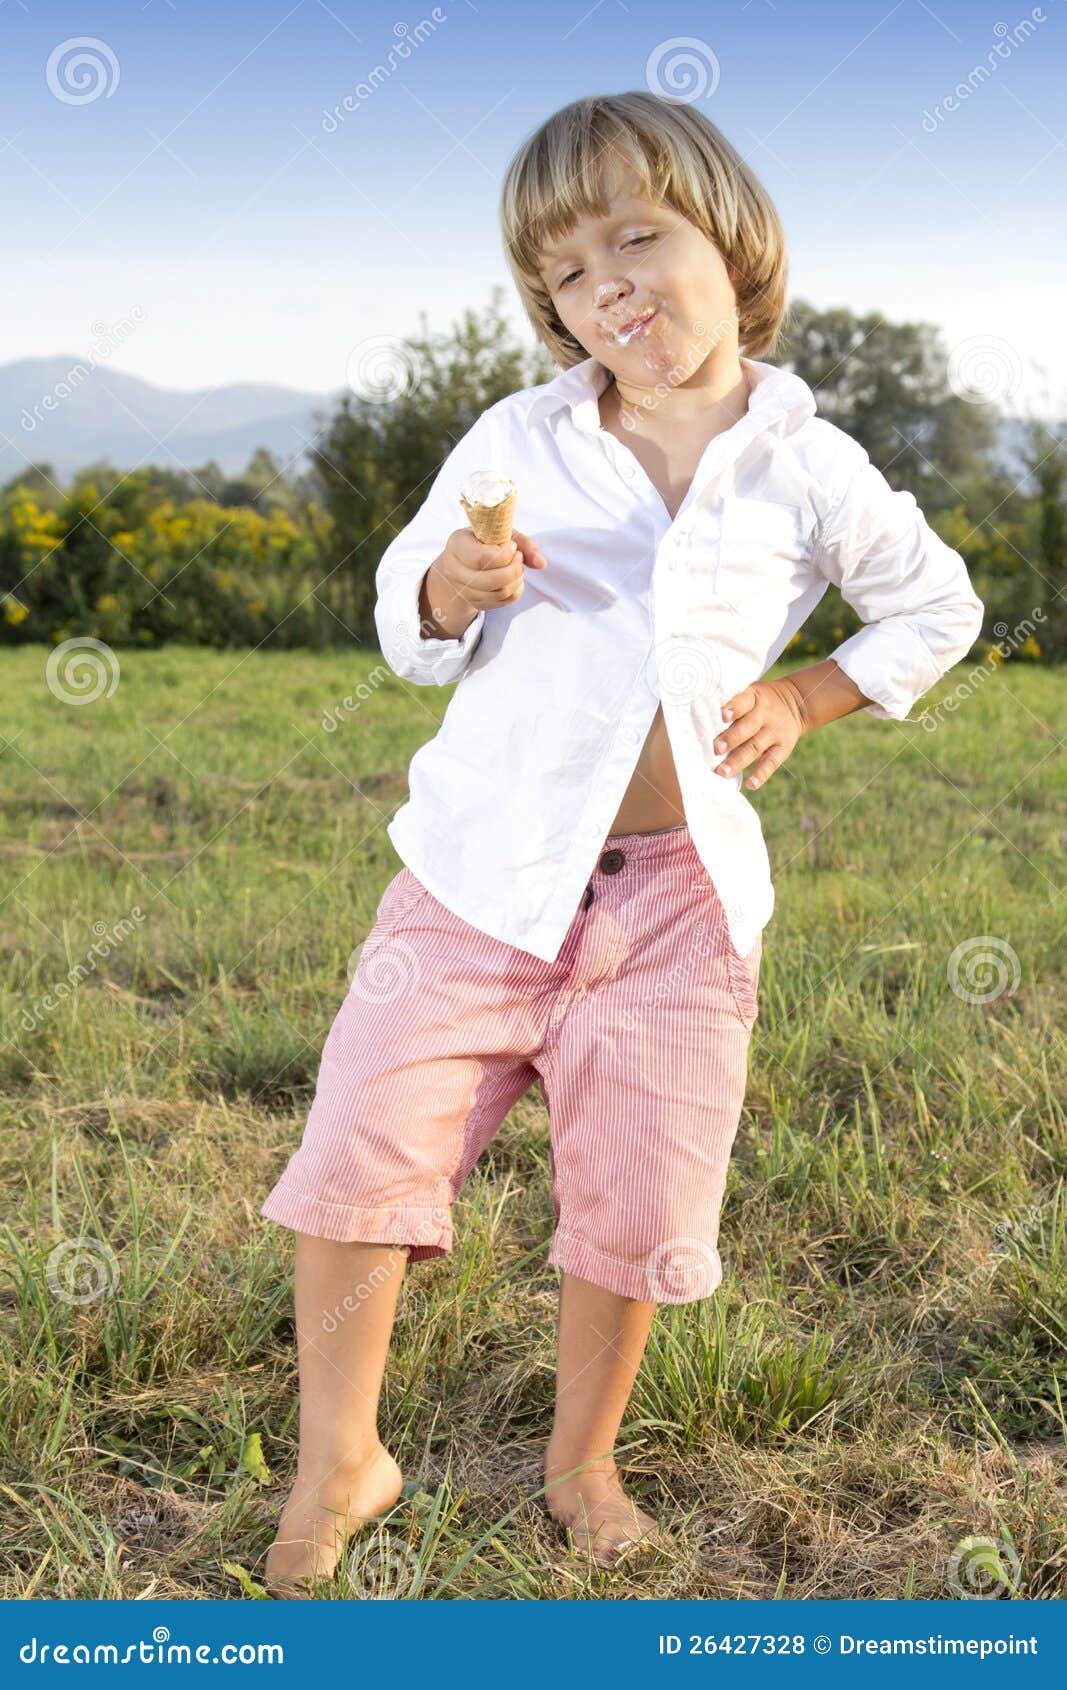 Young Boy Eating a Tasty Ice Cream Stock Photo - Image of daytime ...